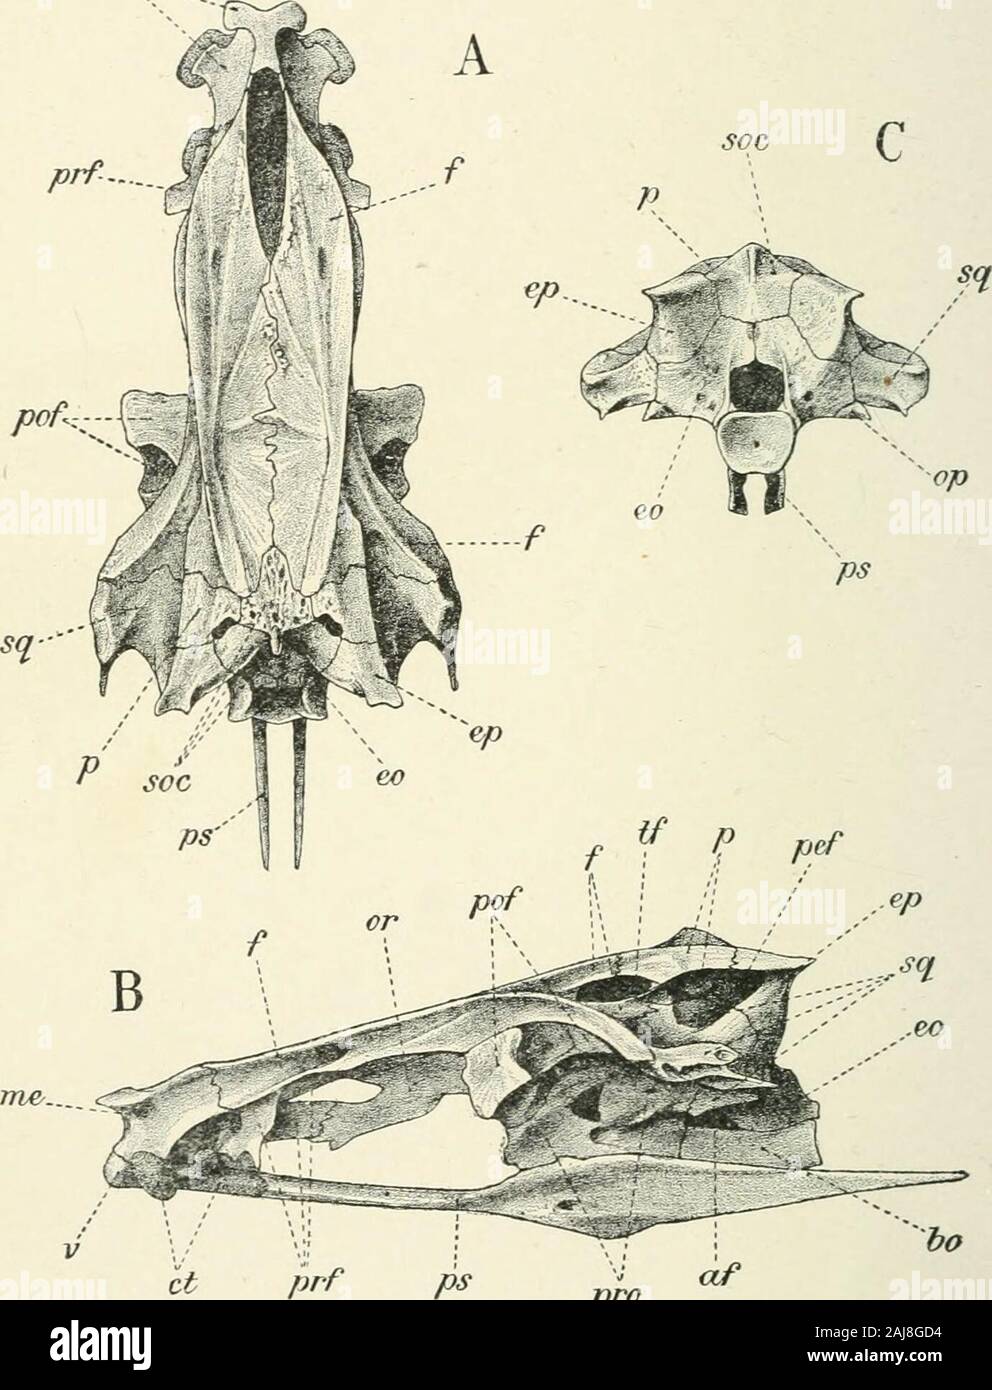 A treatise on zoology . n Chanos ; and of pelvic lepidotrichia from eleven to six. Thehypural bones remain simple. There is a remarkable development ofintermuscular bones, epineurals, epipleurals, and adpleurals ; and usuallythe pleural ribs are joined below by a series of median V-shaped scalesso as to form complete hoops ; similar dorsal ridge scales may be present.The coracoids join to a ventral keel ; and the postclavicle is quitepeculiar in that it overlaps outside the clavicle. Caecal prolongations of the air-bladder rest against the auditoryfenestra, and the pneumatic duct opens into th Stock Photo